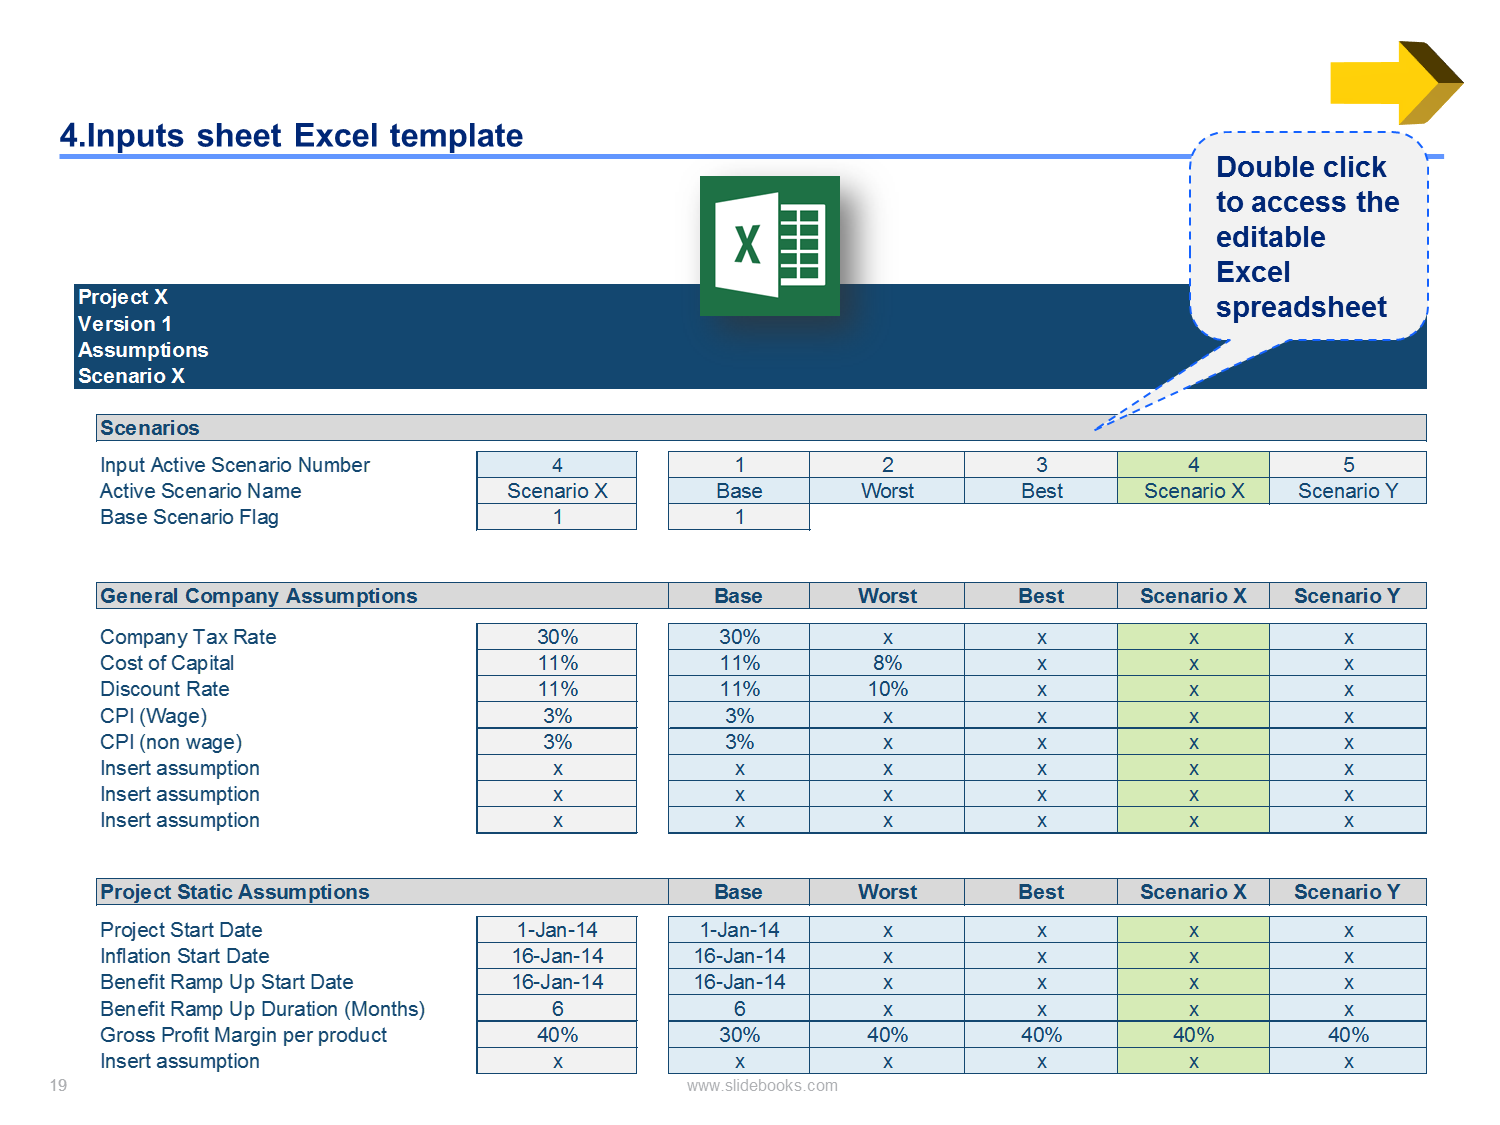 Personal Excel Templates For Business inside Excel Templates For Business Printable